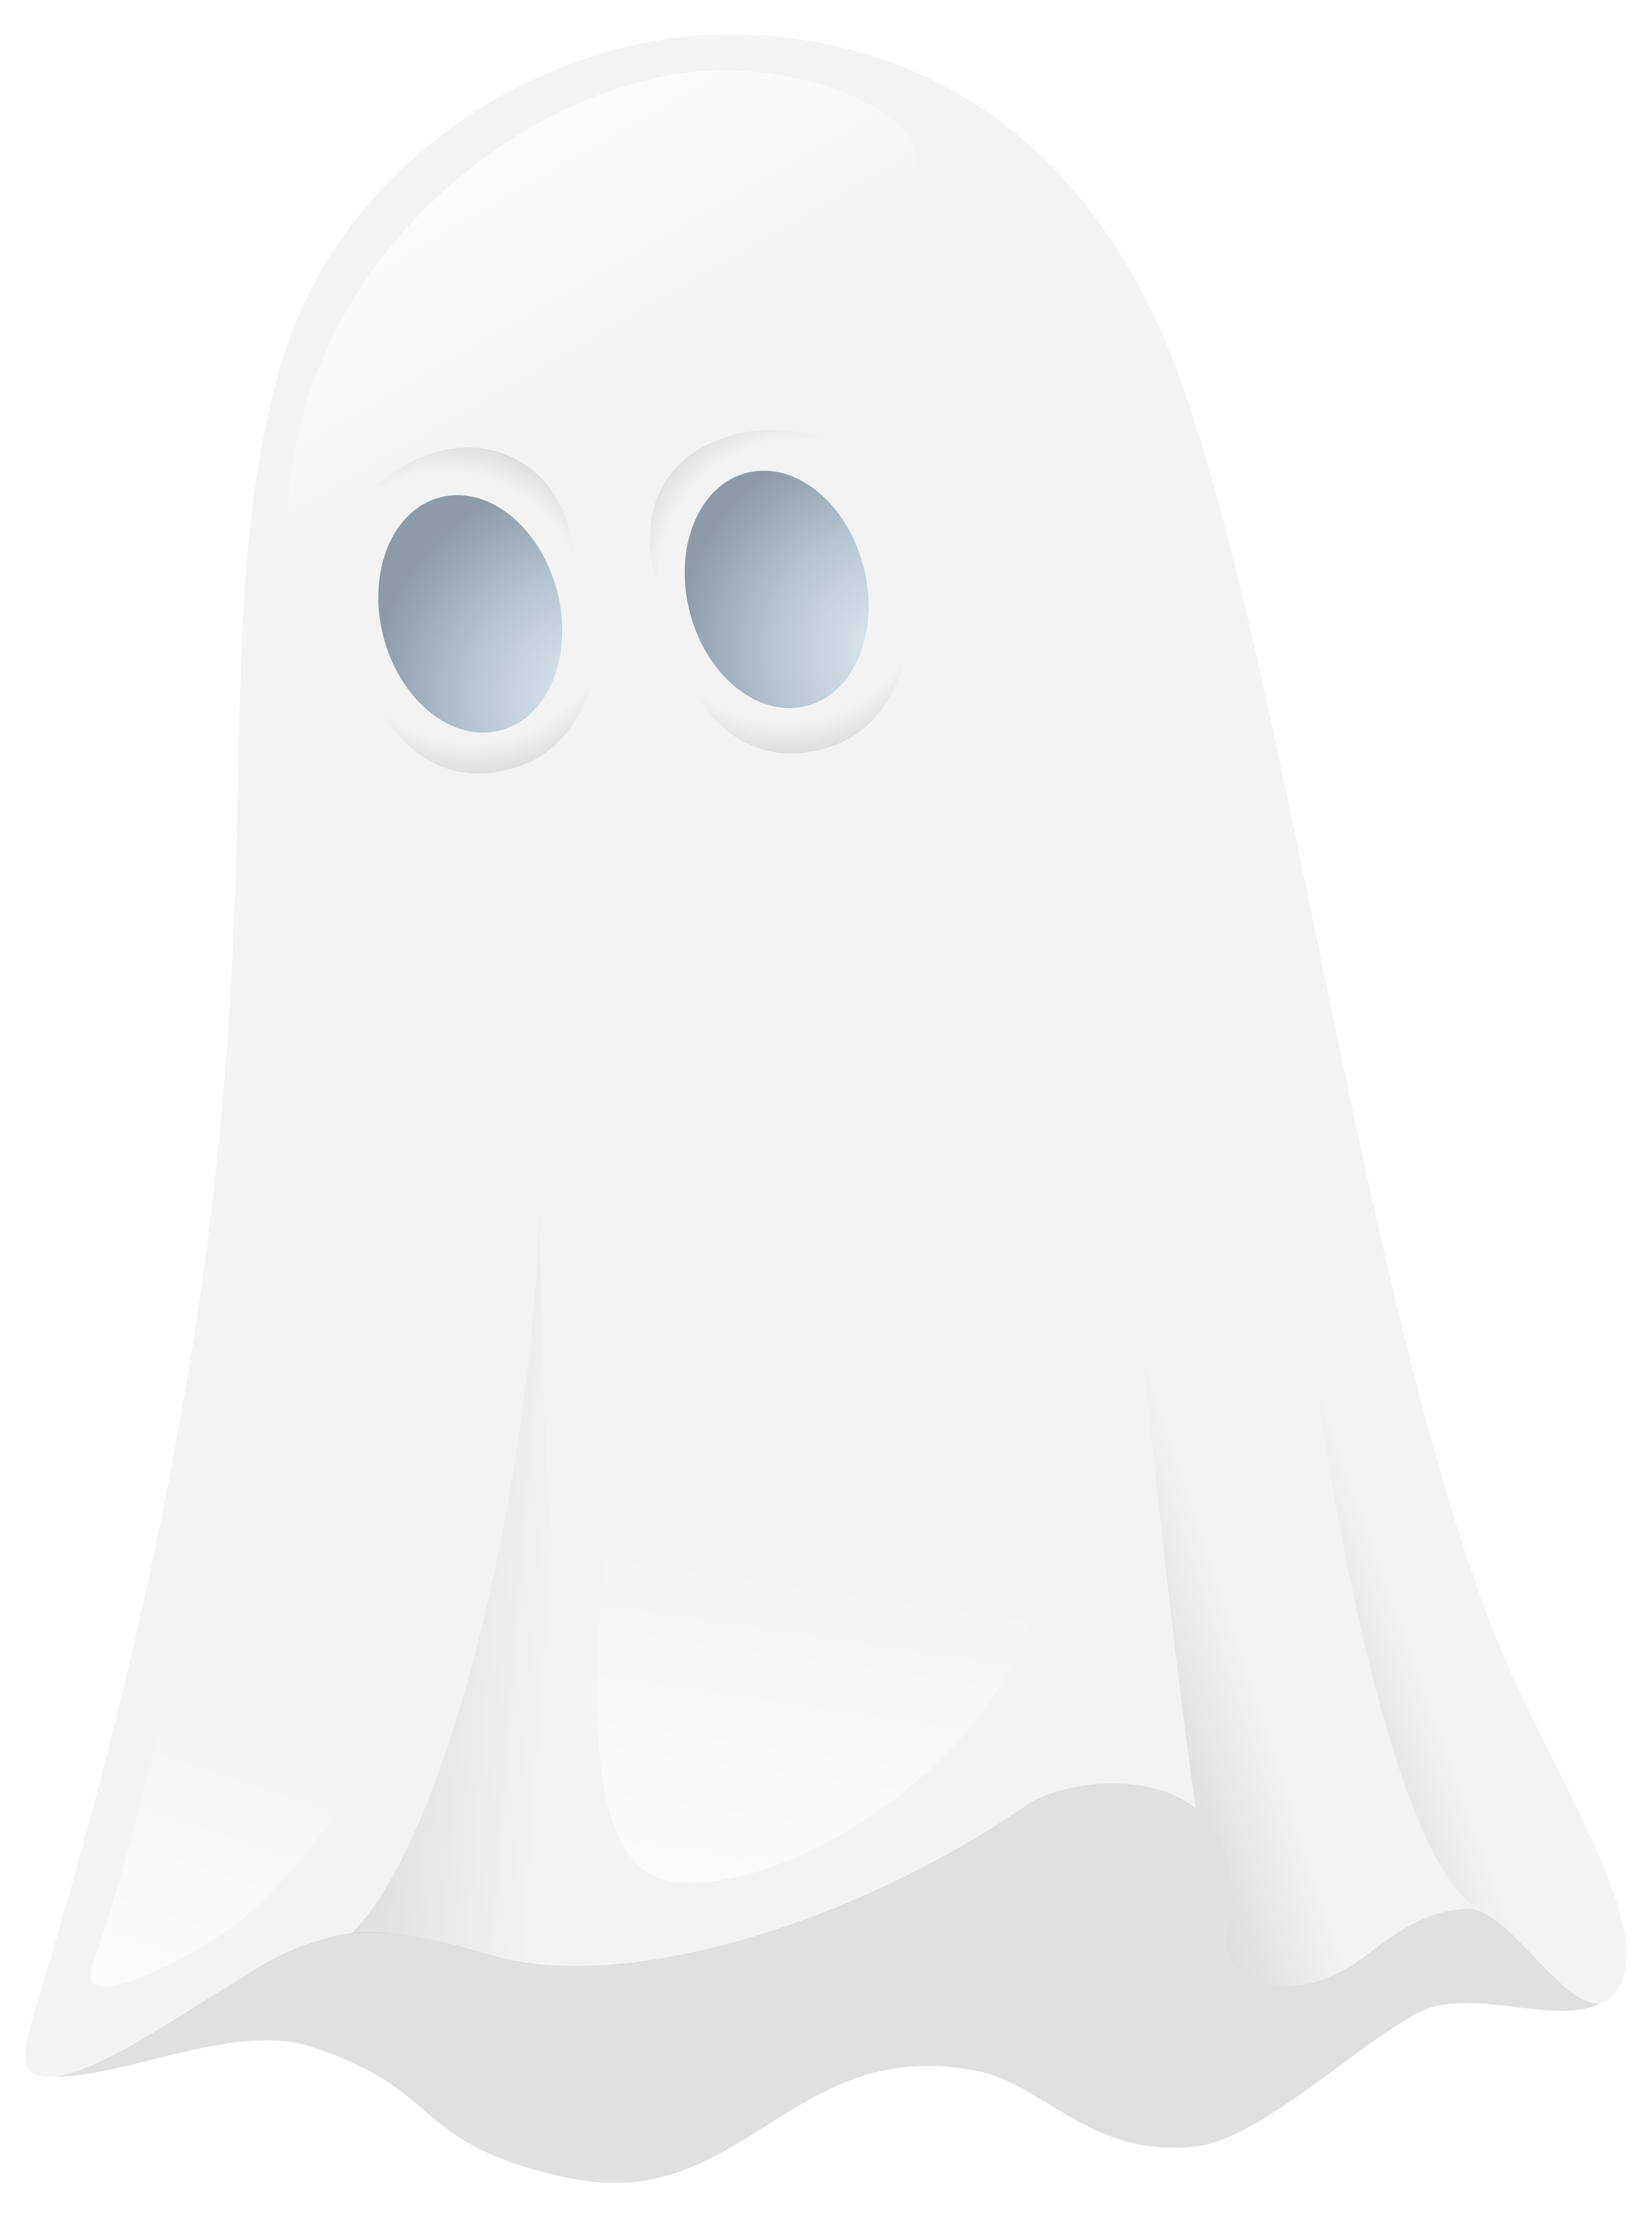 kid clipart ghost